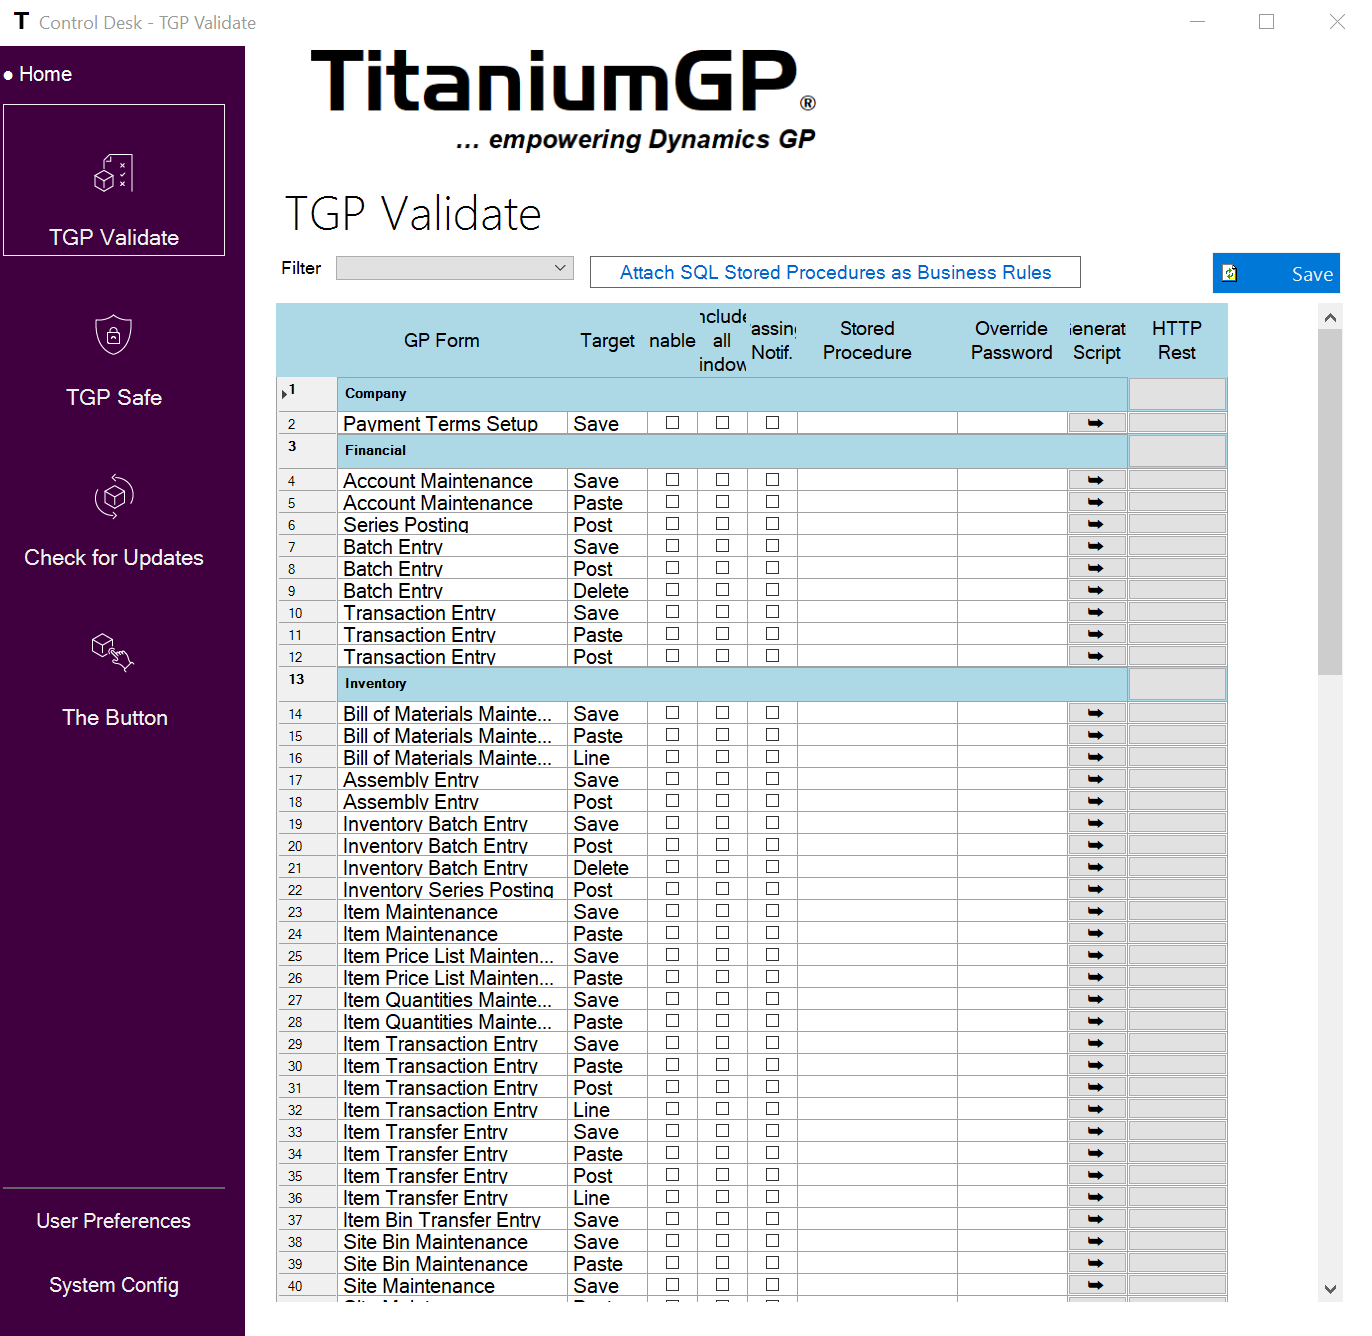 A screenshot showing the TGP Validate user interface.